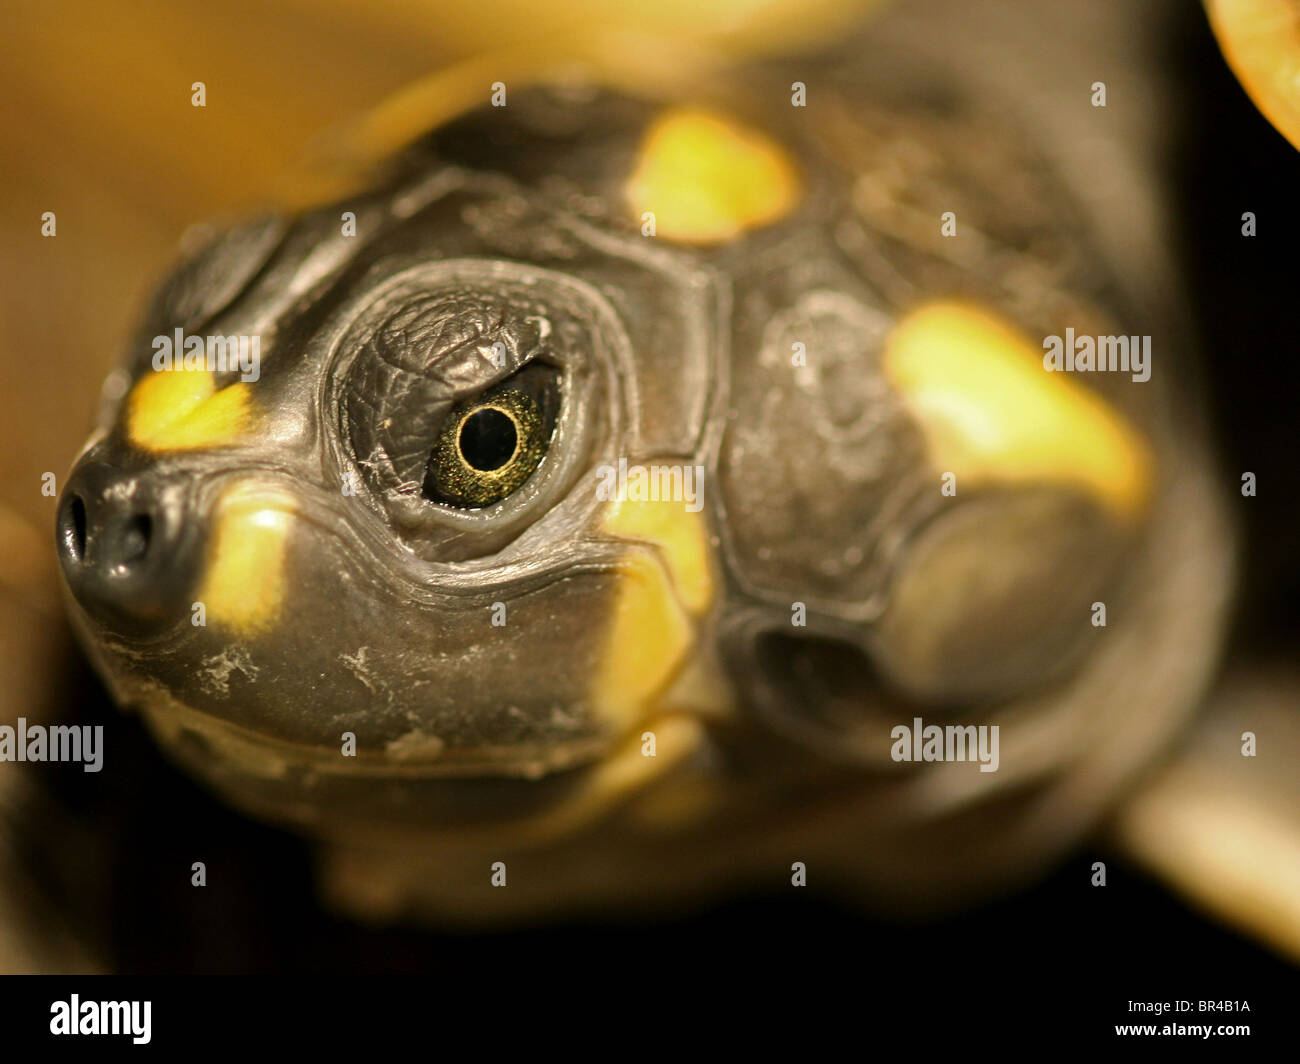 Yellow-spotted Amazon River Turtle (Podocnemis unifilis) isolated in Peru Stock Photo